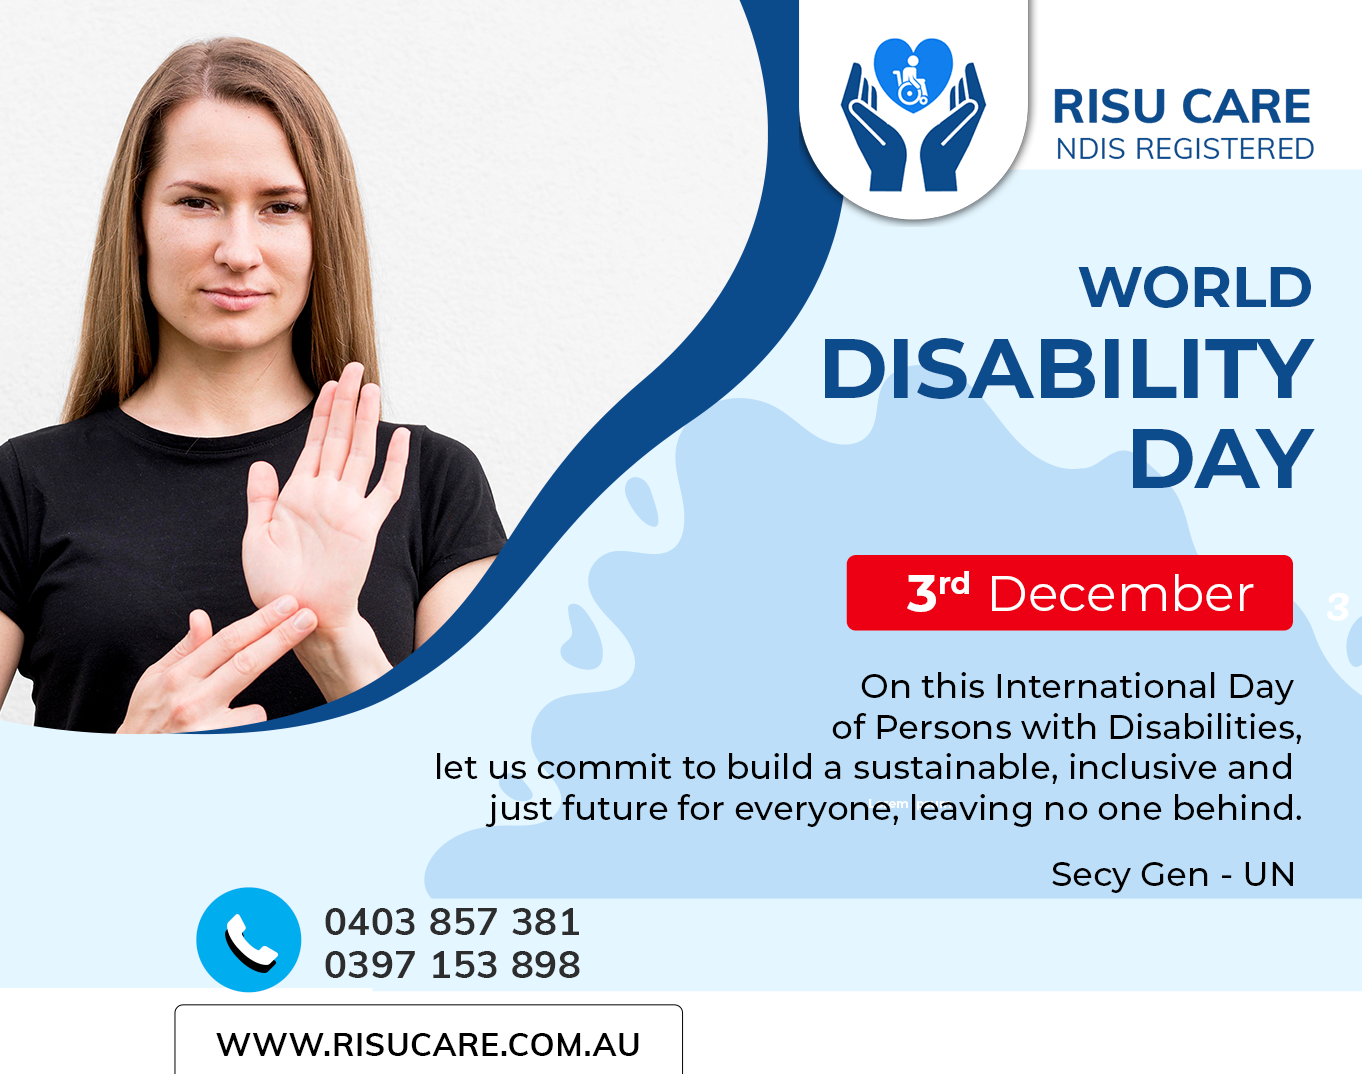 Message on World Disability Day